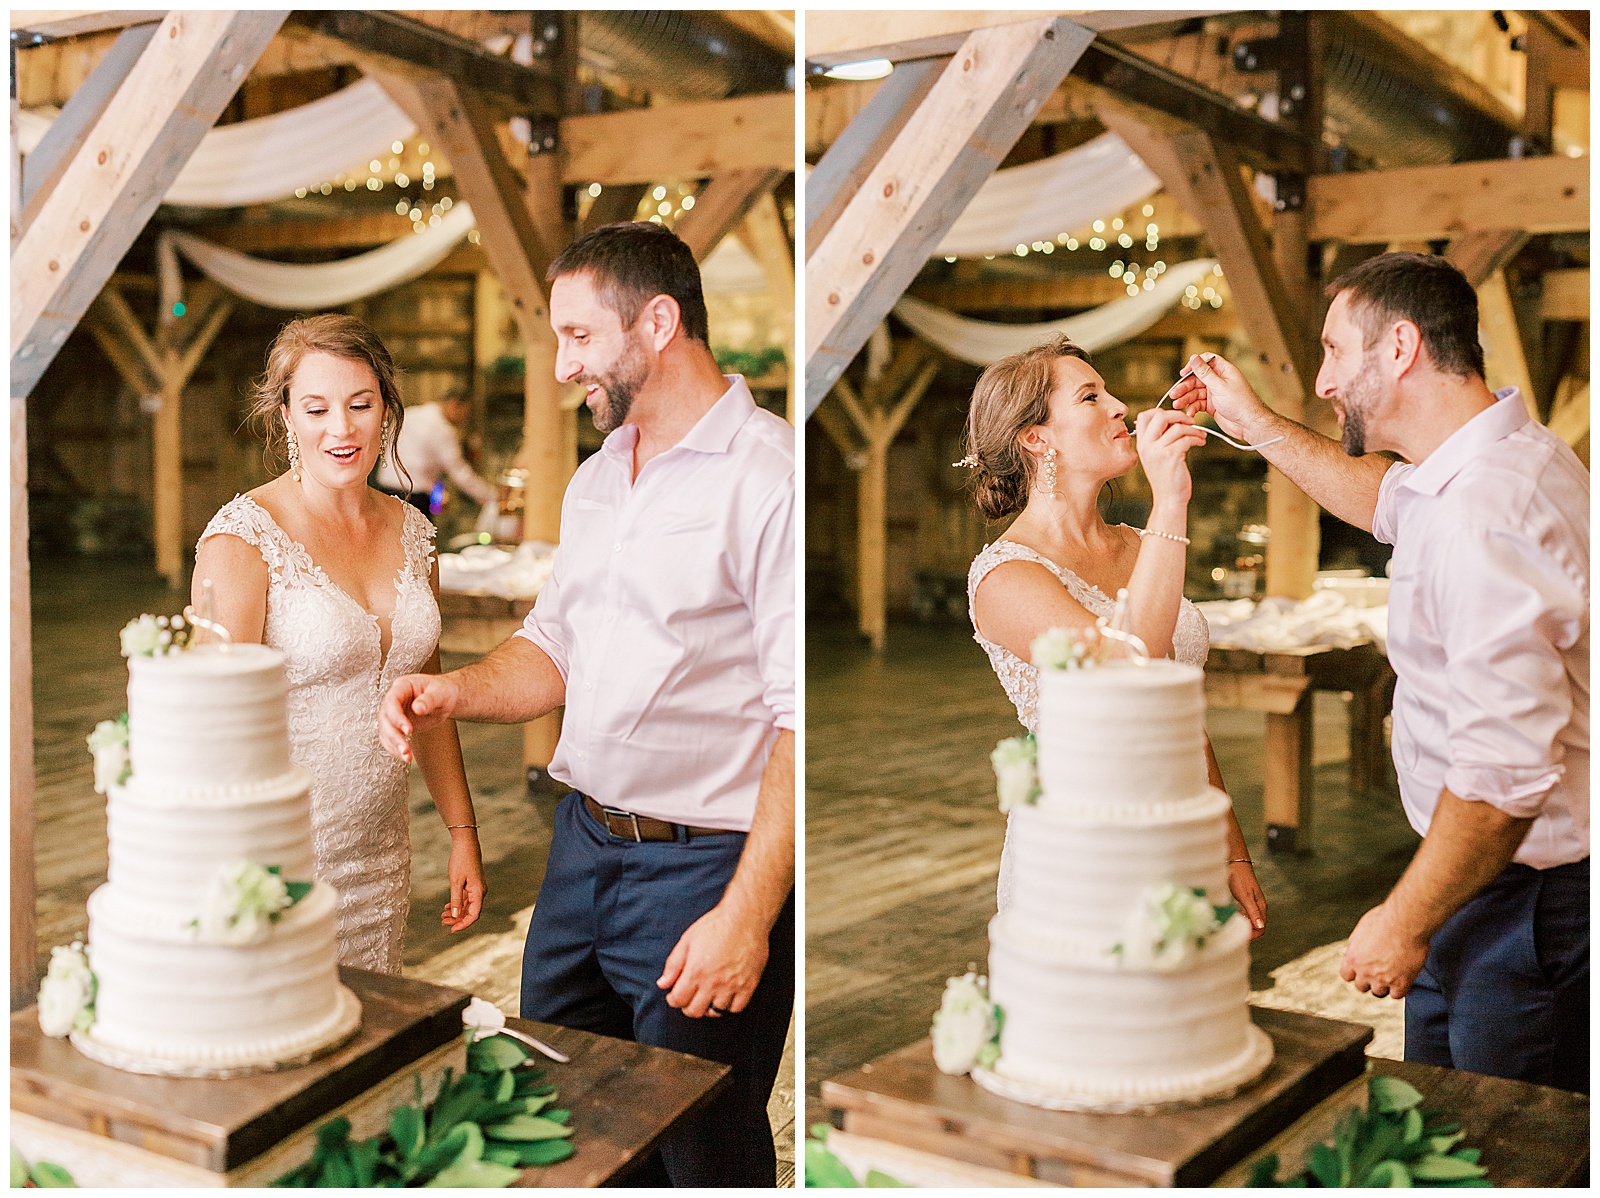 bride and groom eat three tiered white cake at indoor summer wedding reception in wooden barn